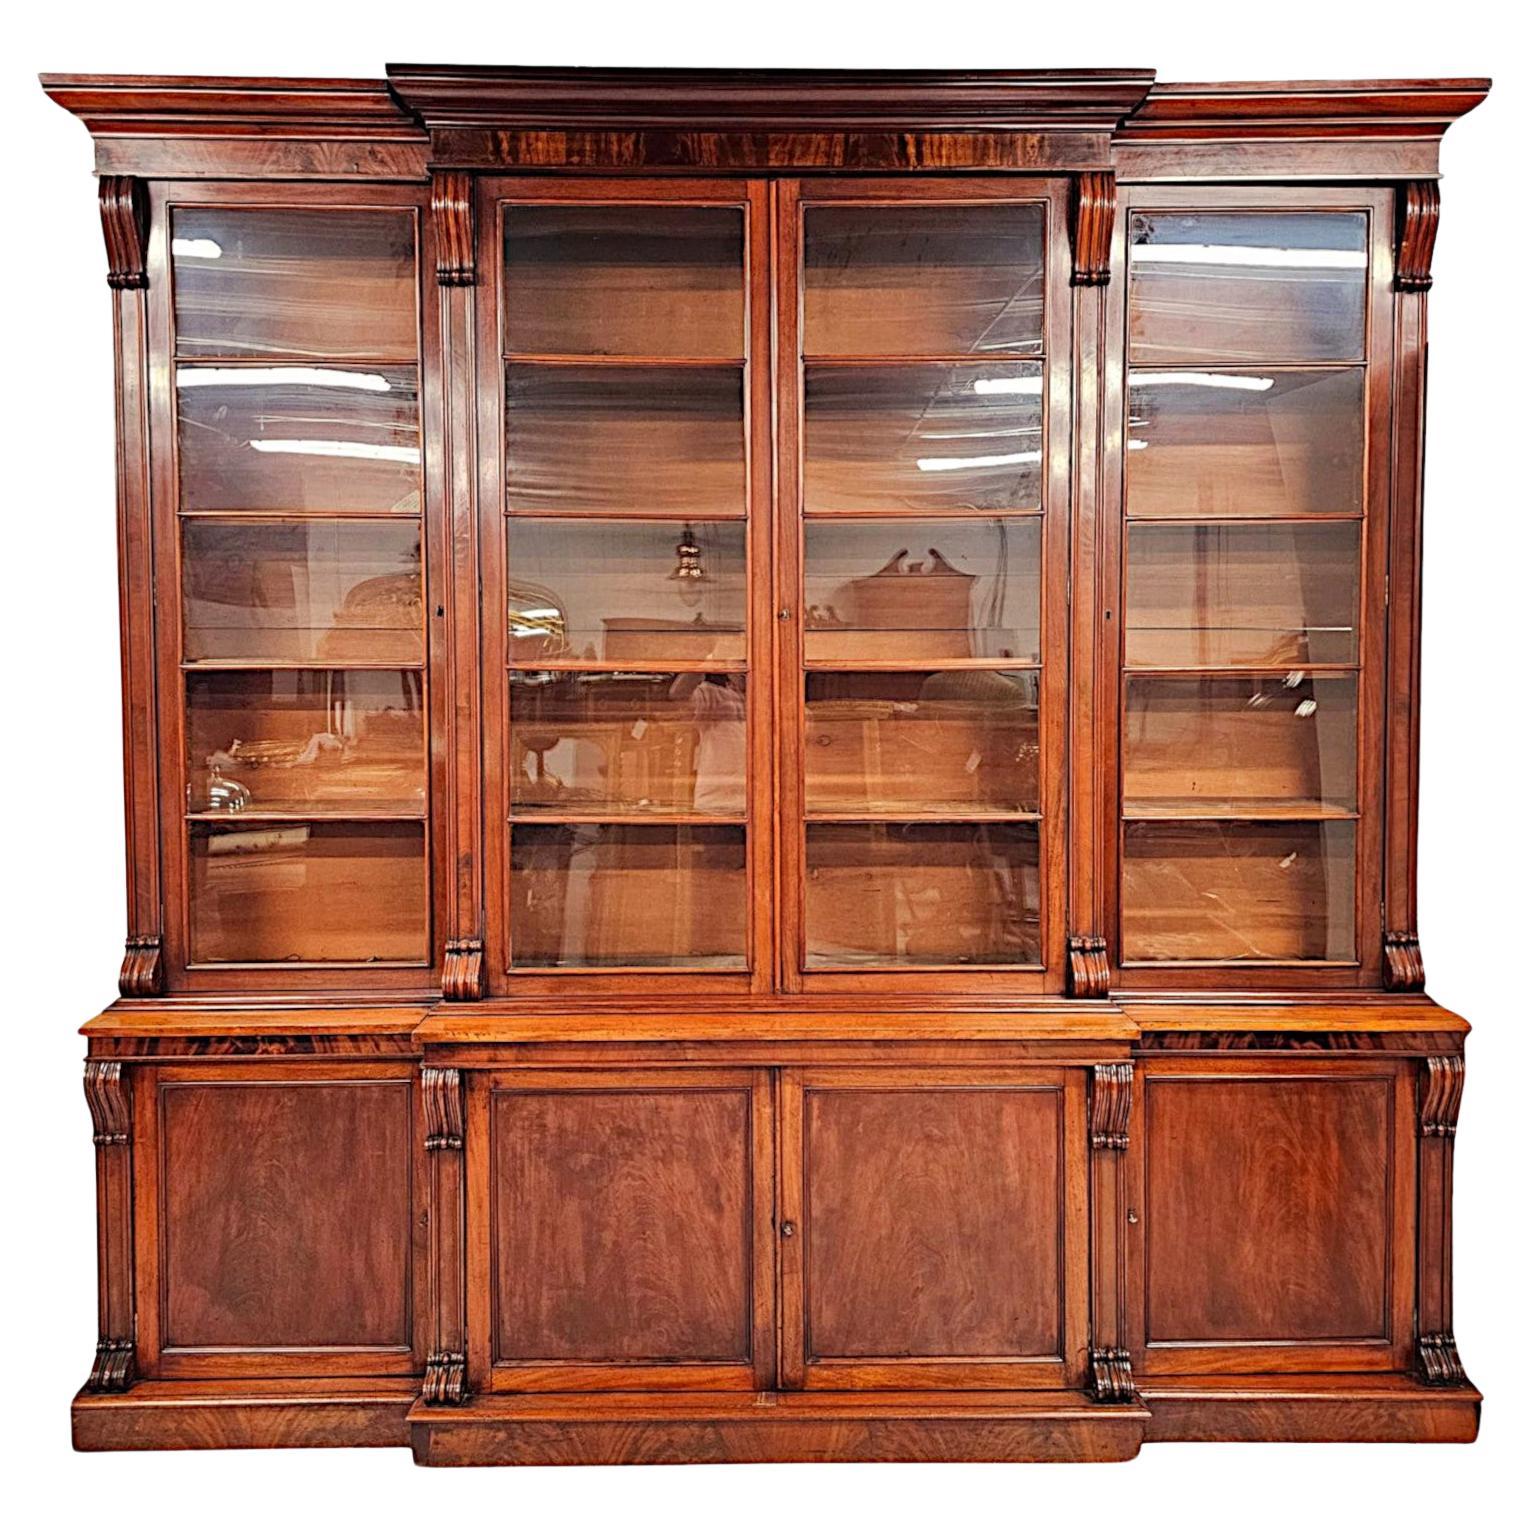 A Very Rare 19th Century Irish Breakfront Bookcase Labelled 'Strahan of Dublin' For Sale